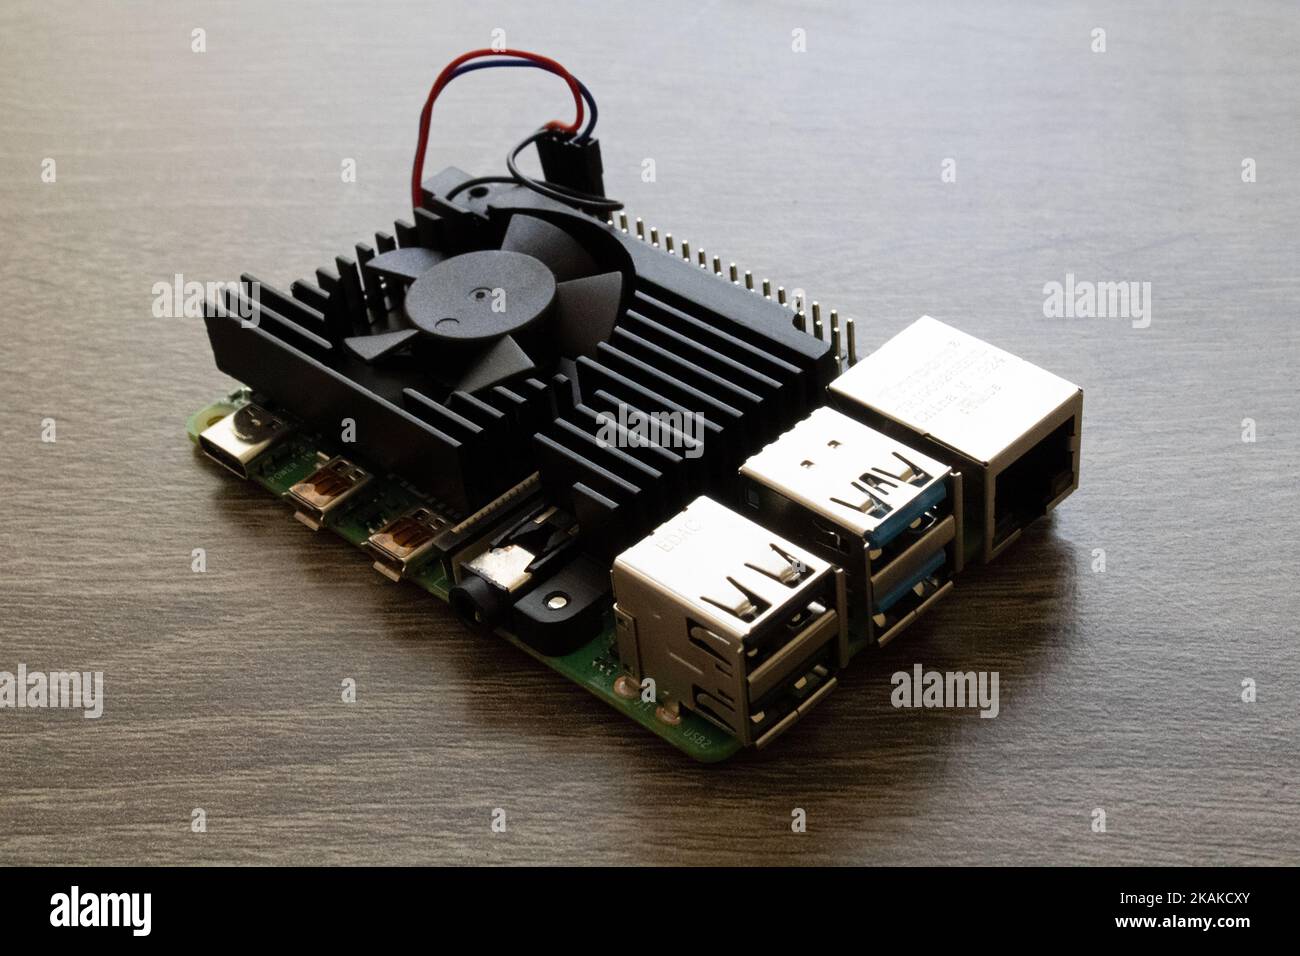 A Raspberry Pi Microcomputer 4B with a black heatsink for Electrical Engineering prototyping and software development for K-12 STEM Stock Photo